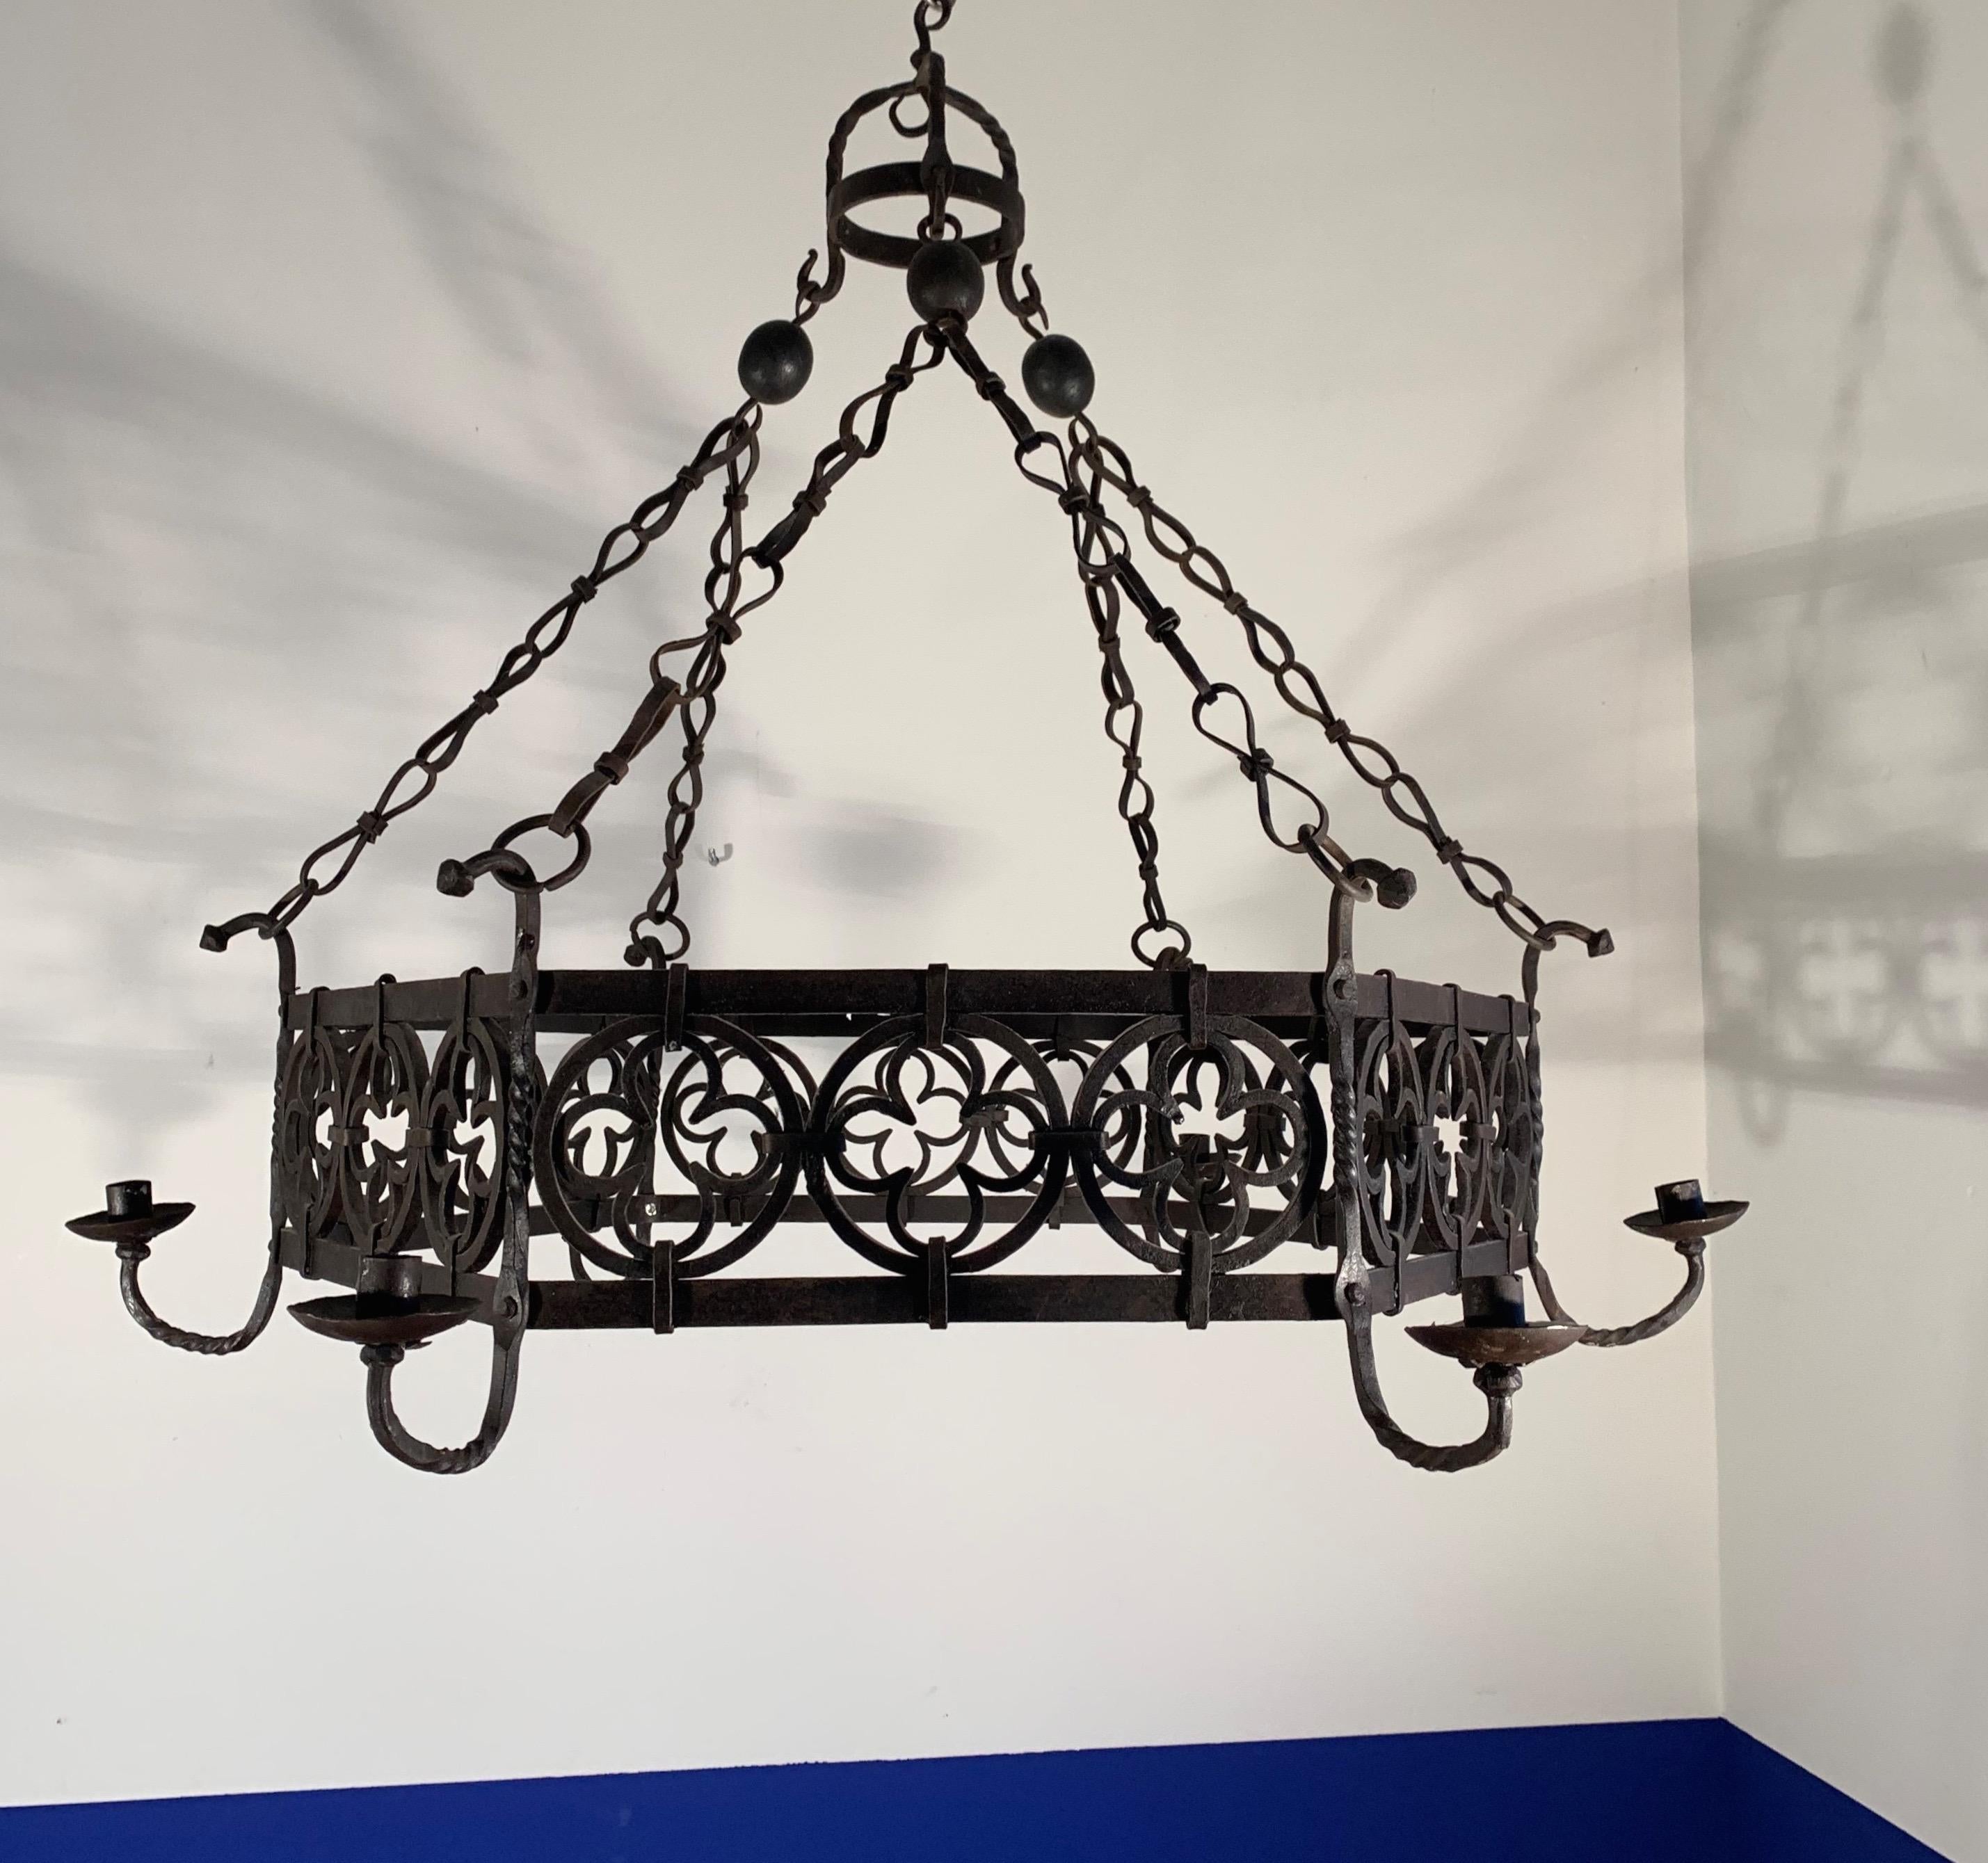 Large Gothic Revival Wrought Iron Chandelier for Dining Room / Restaurant Etc For Sale 7